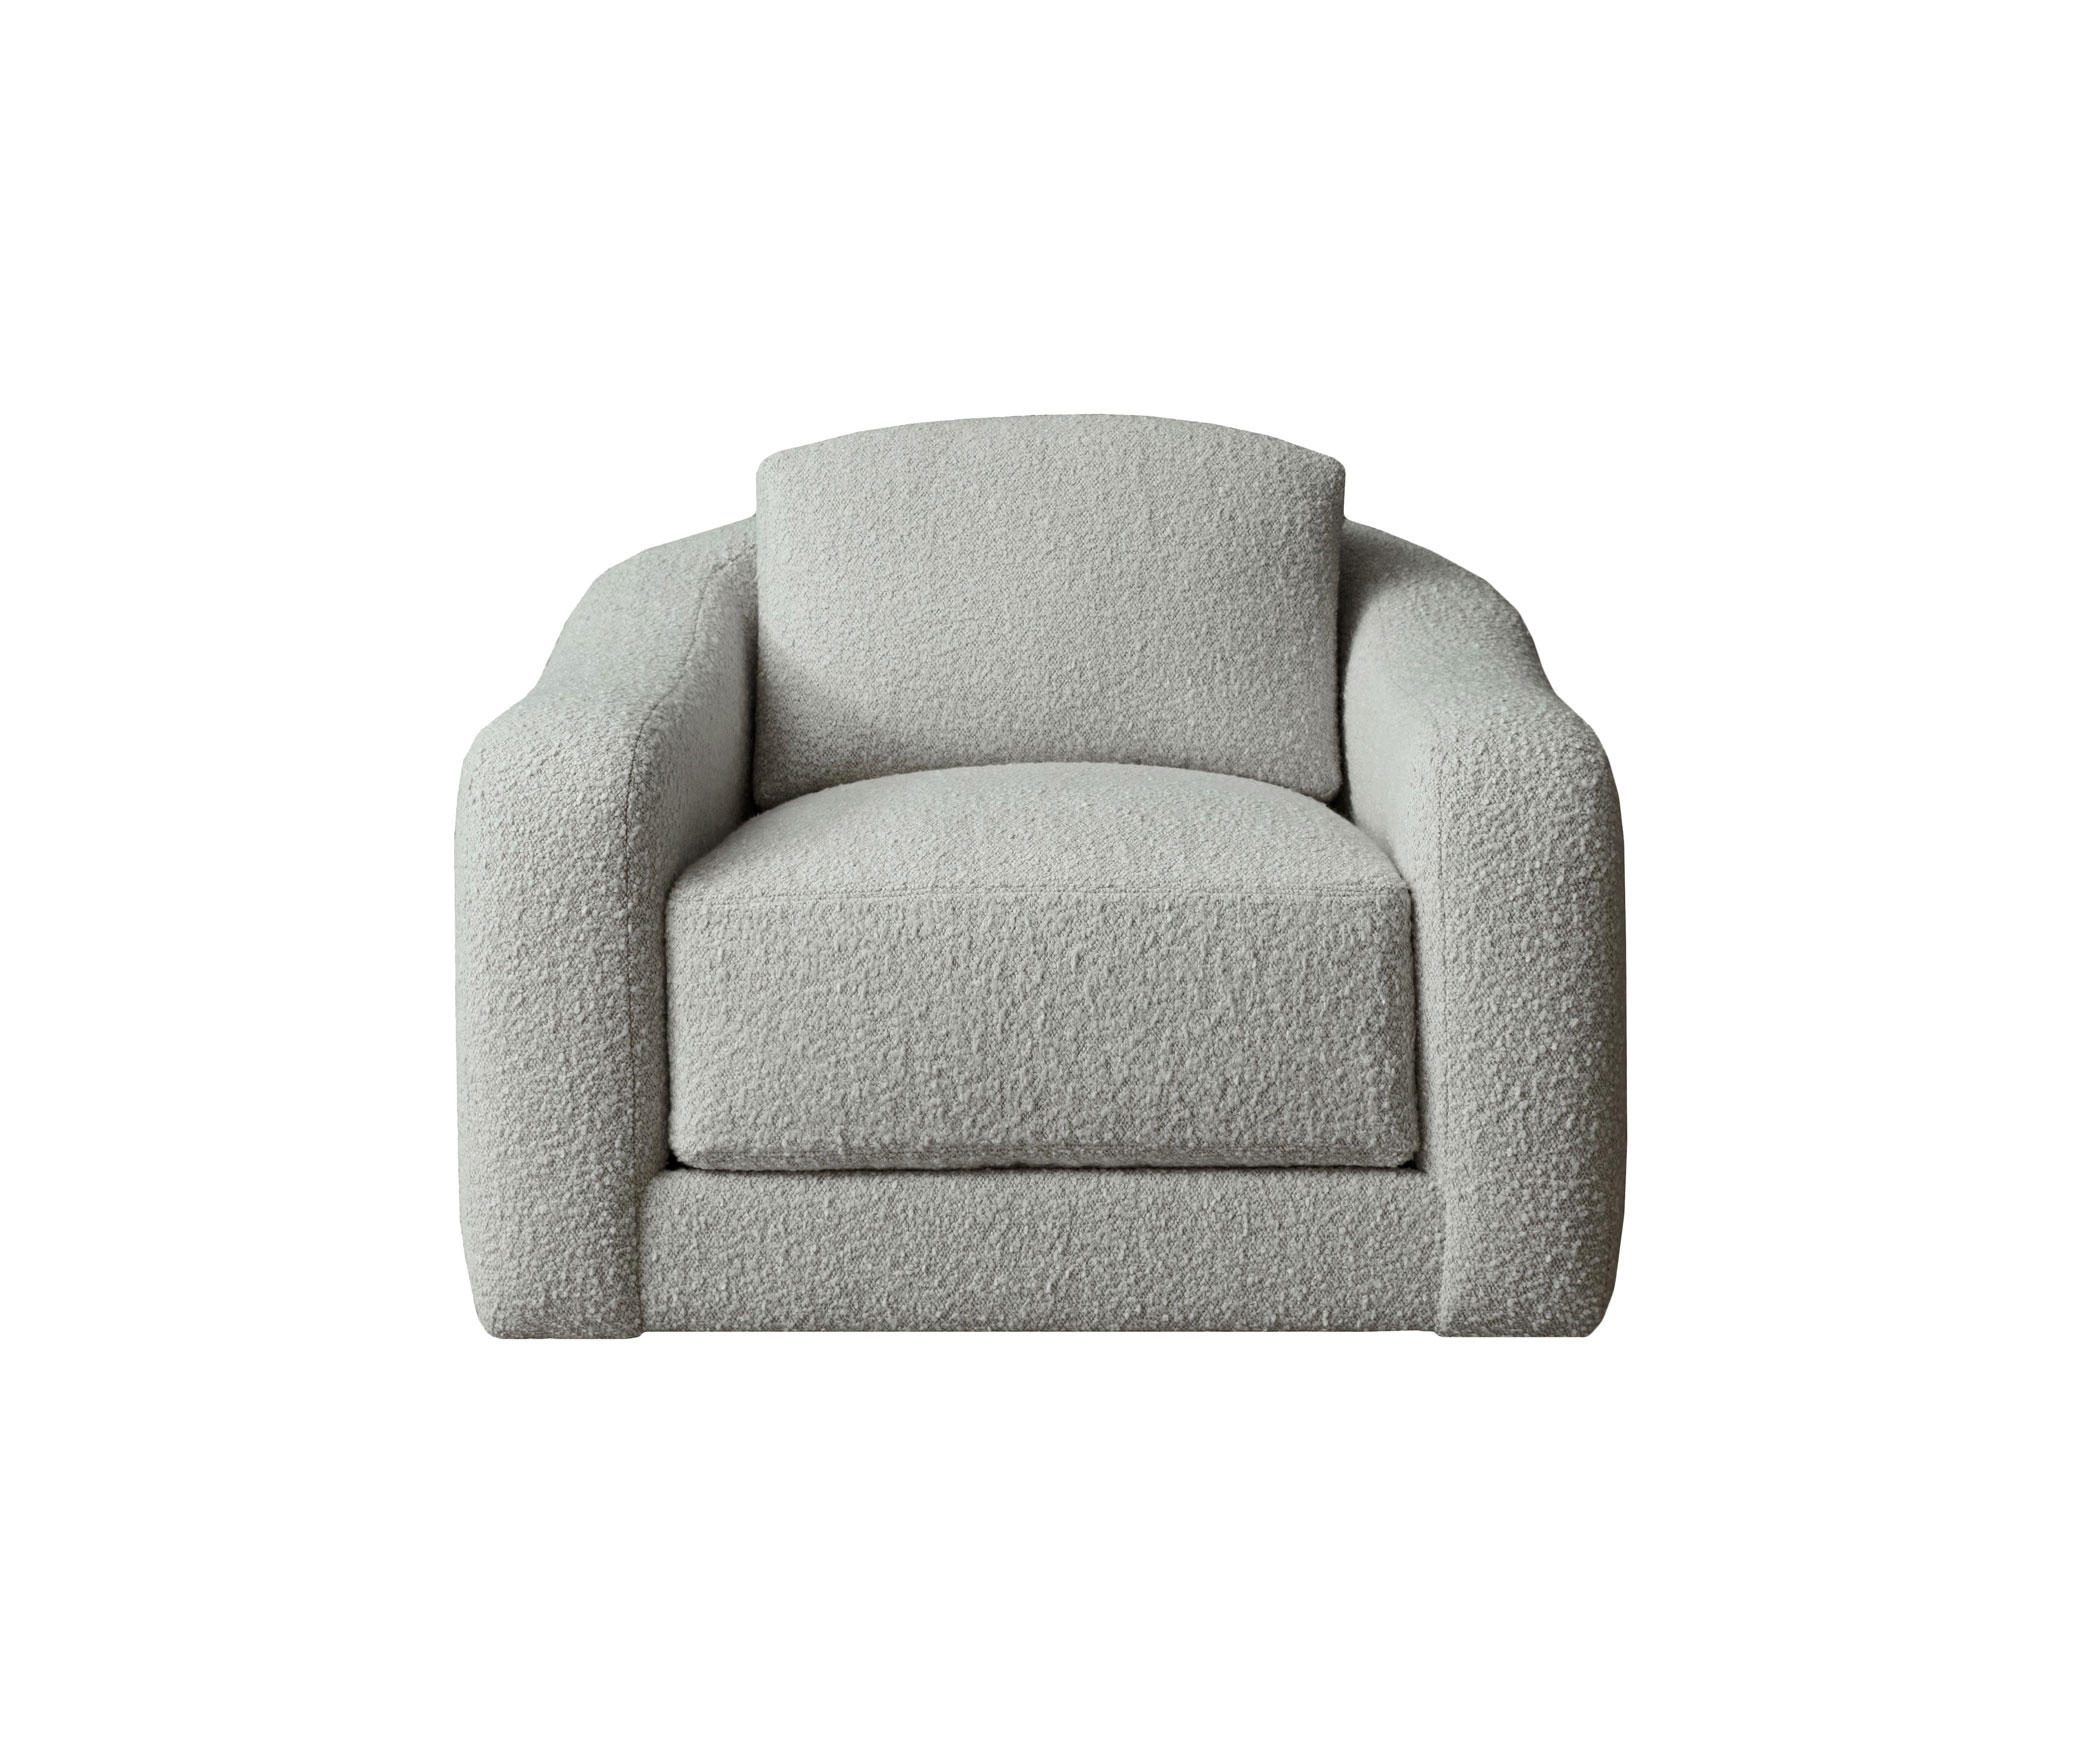 Profiles_Altamont-Swivel-Chair_int_products